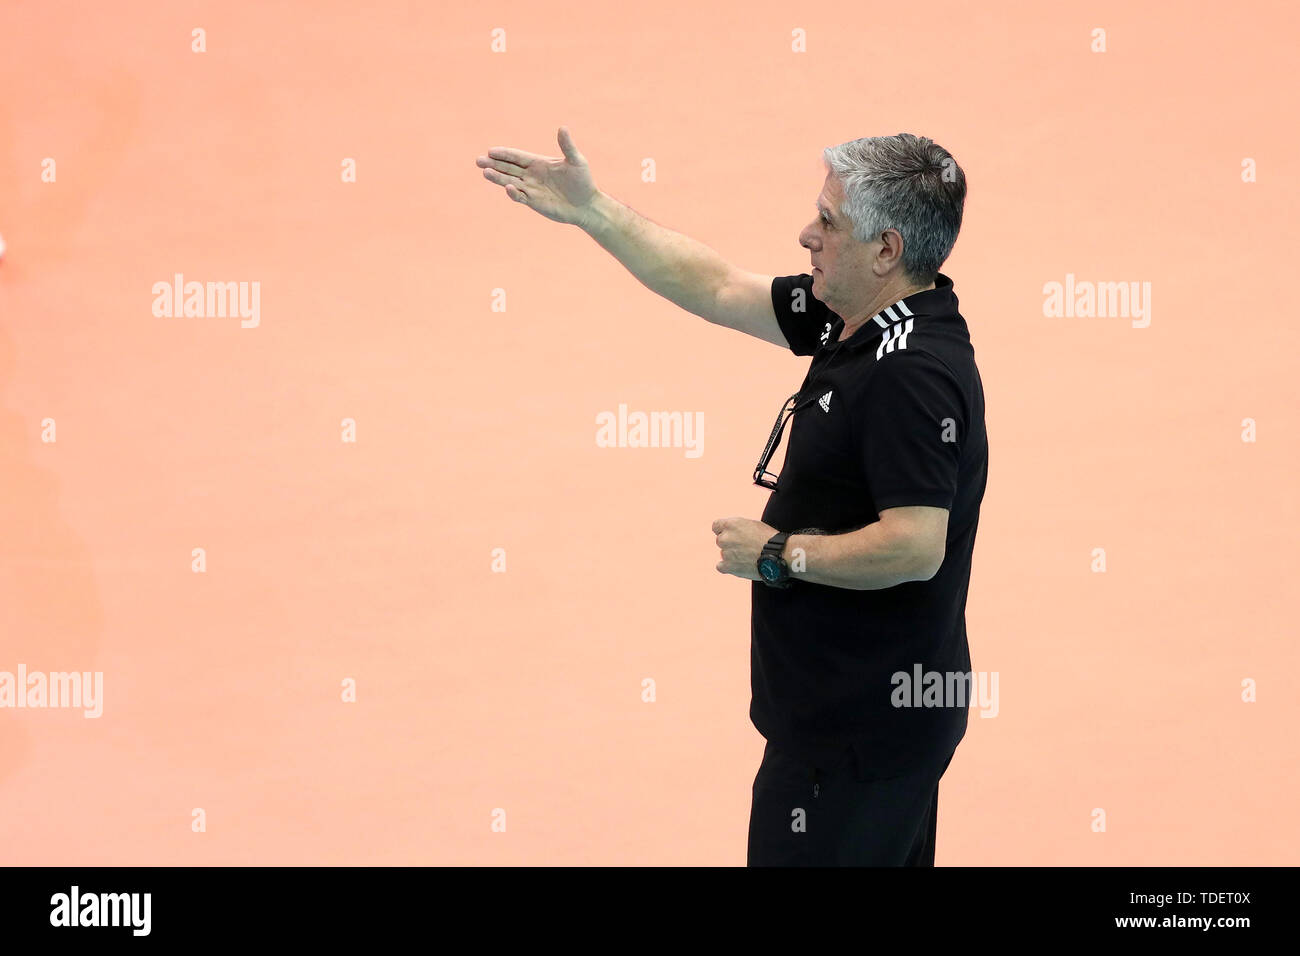 Gondomar, Portugal. 15th June, 2019. China's head coach Raul Lucio Lozano gestures during the FIVB Volleyball Nations League match between Brazil and China at Multiusos de Gondomar Hall in Gondomar, Portugal, on June 15, 2019. Brazil won 3-0. Credit: Pedro Fiuza/Xinhua/Alamy Live News Stock Photo